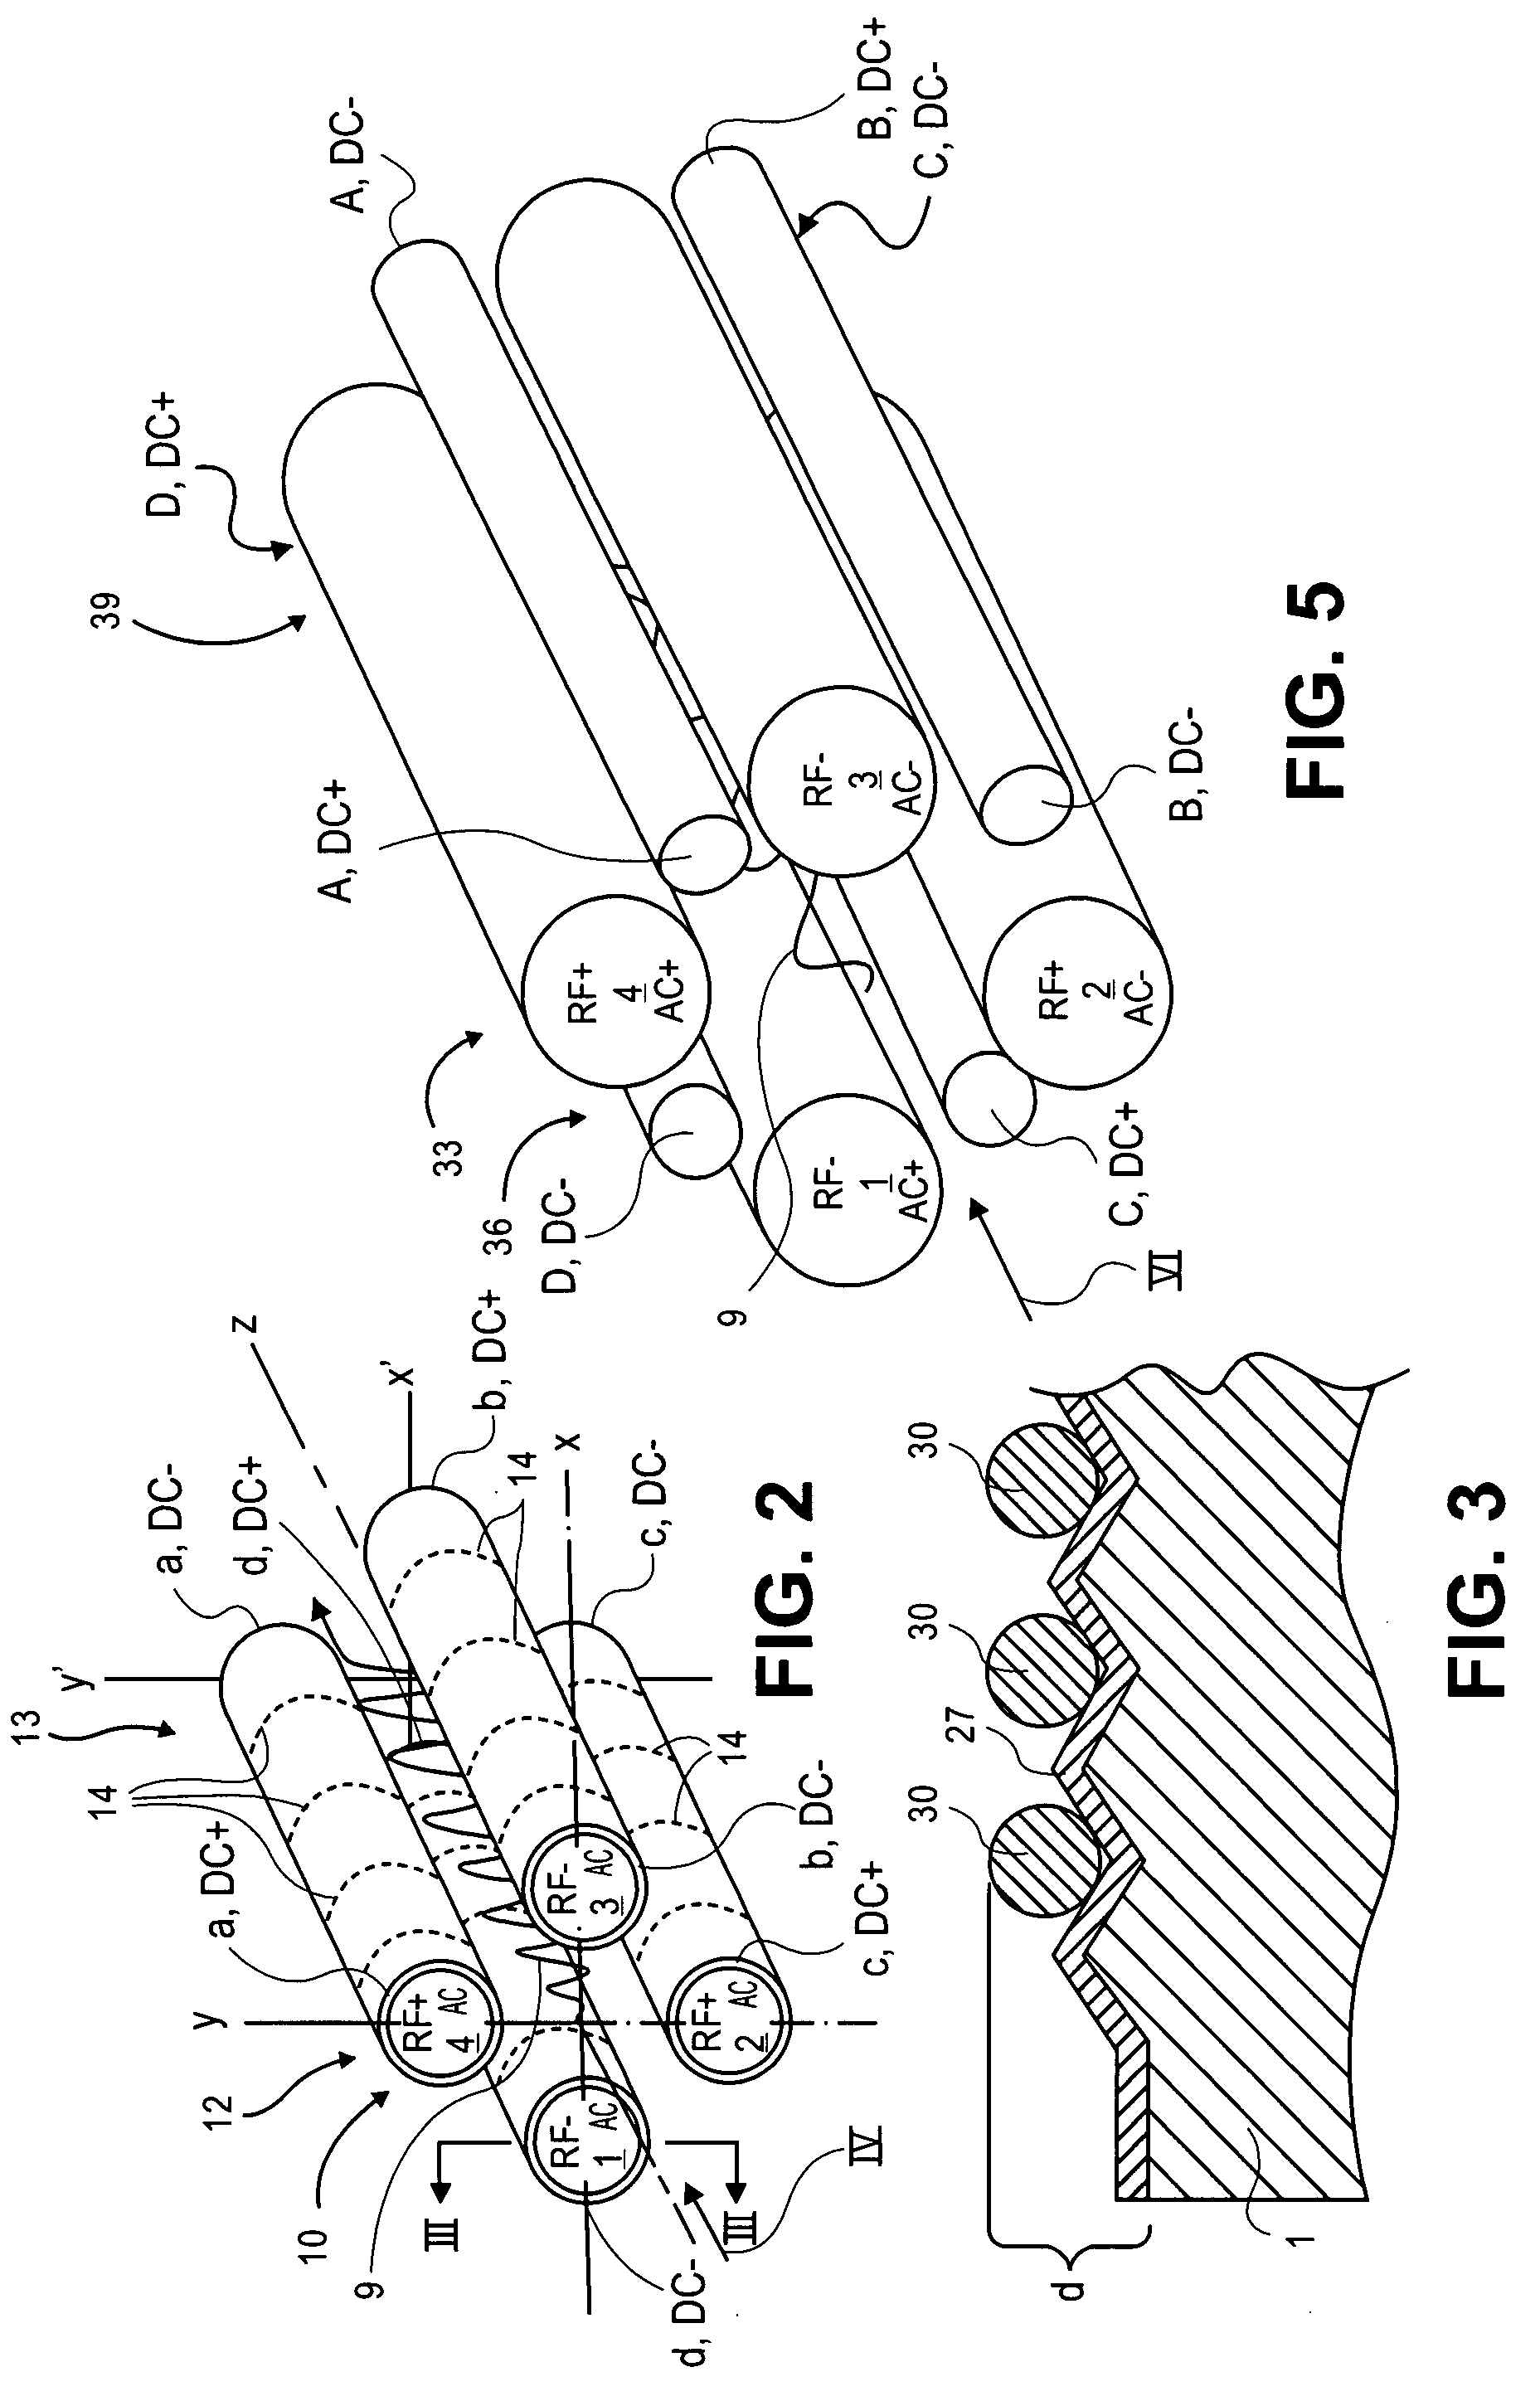 Separation and axial ejection of ions based on m/z ratio